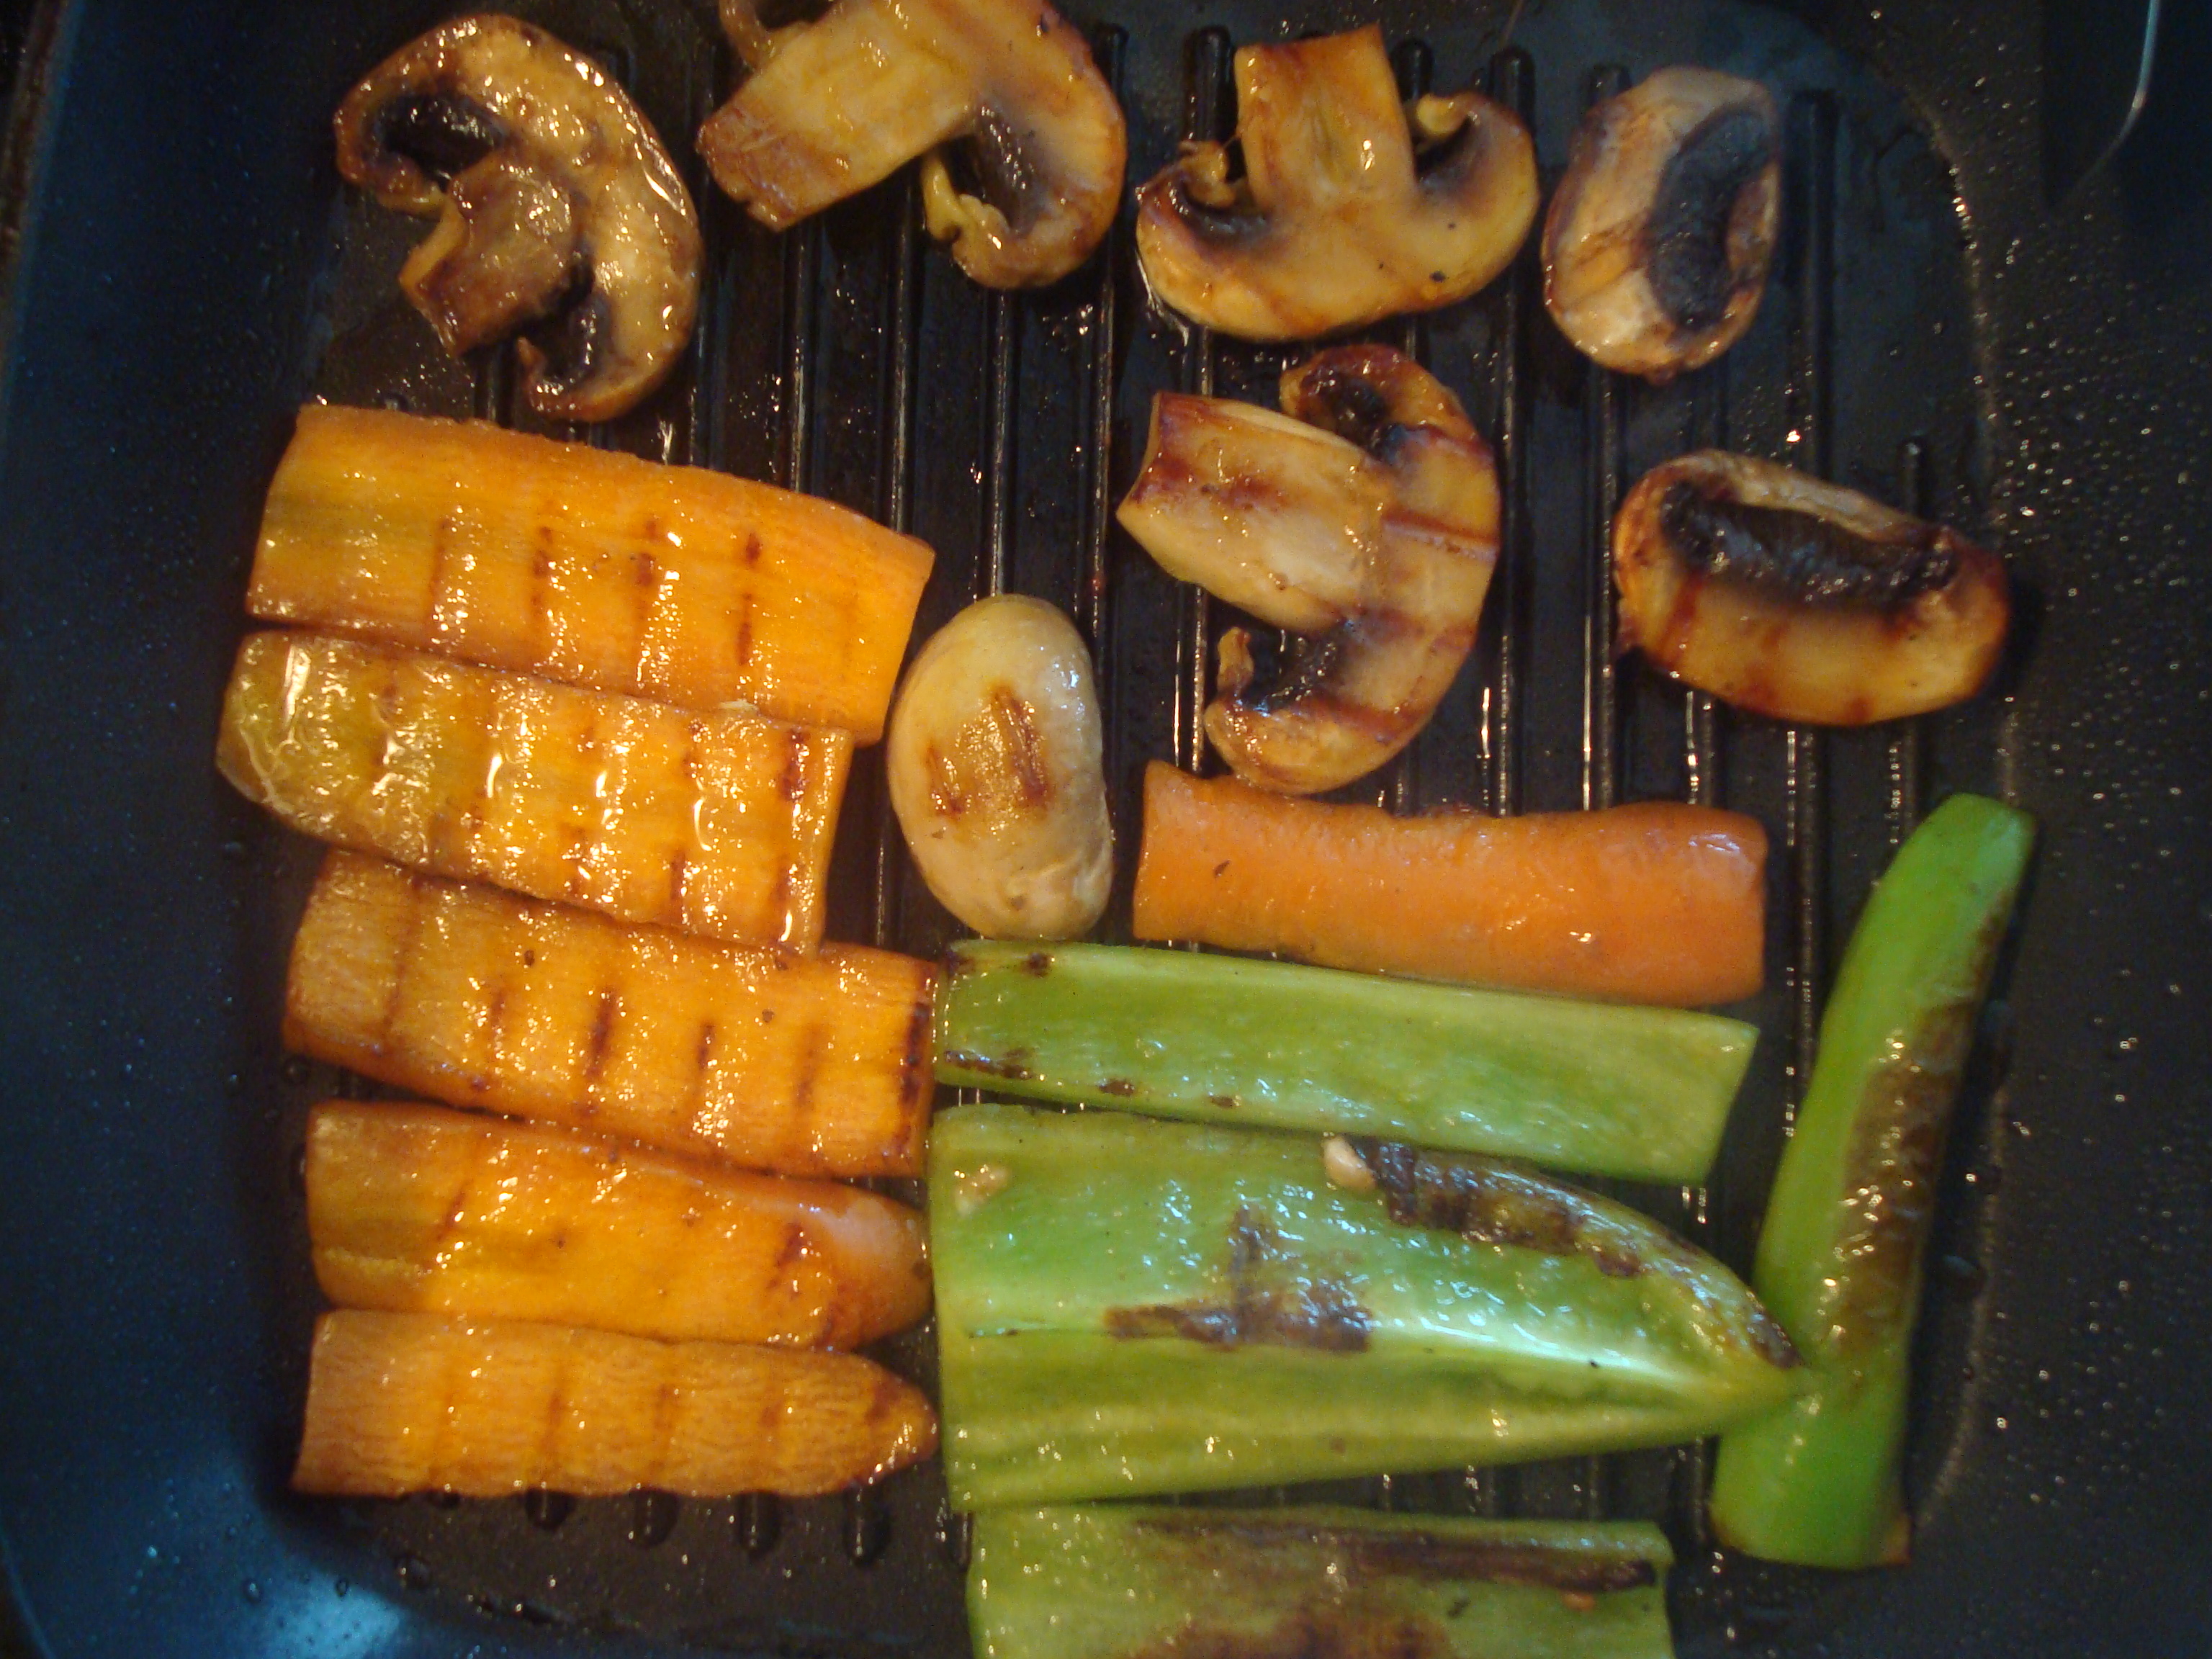 Cooking vegetables photo